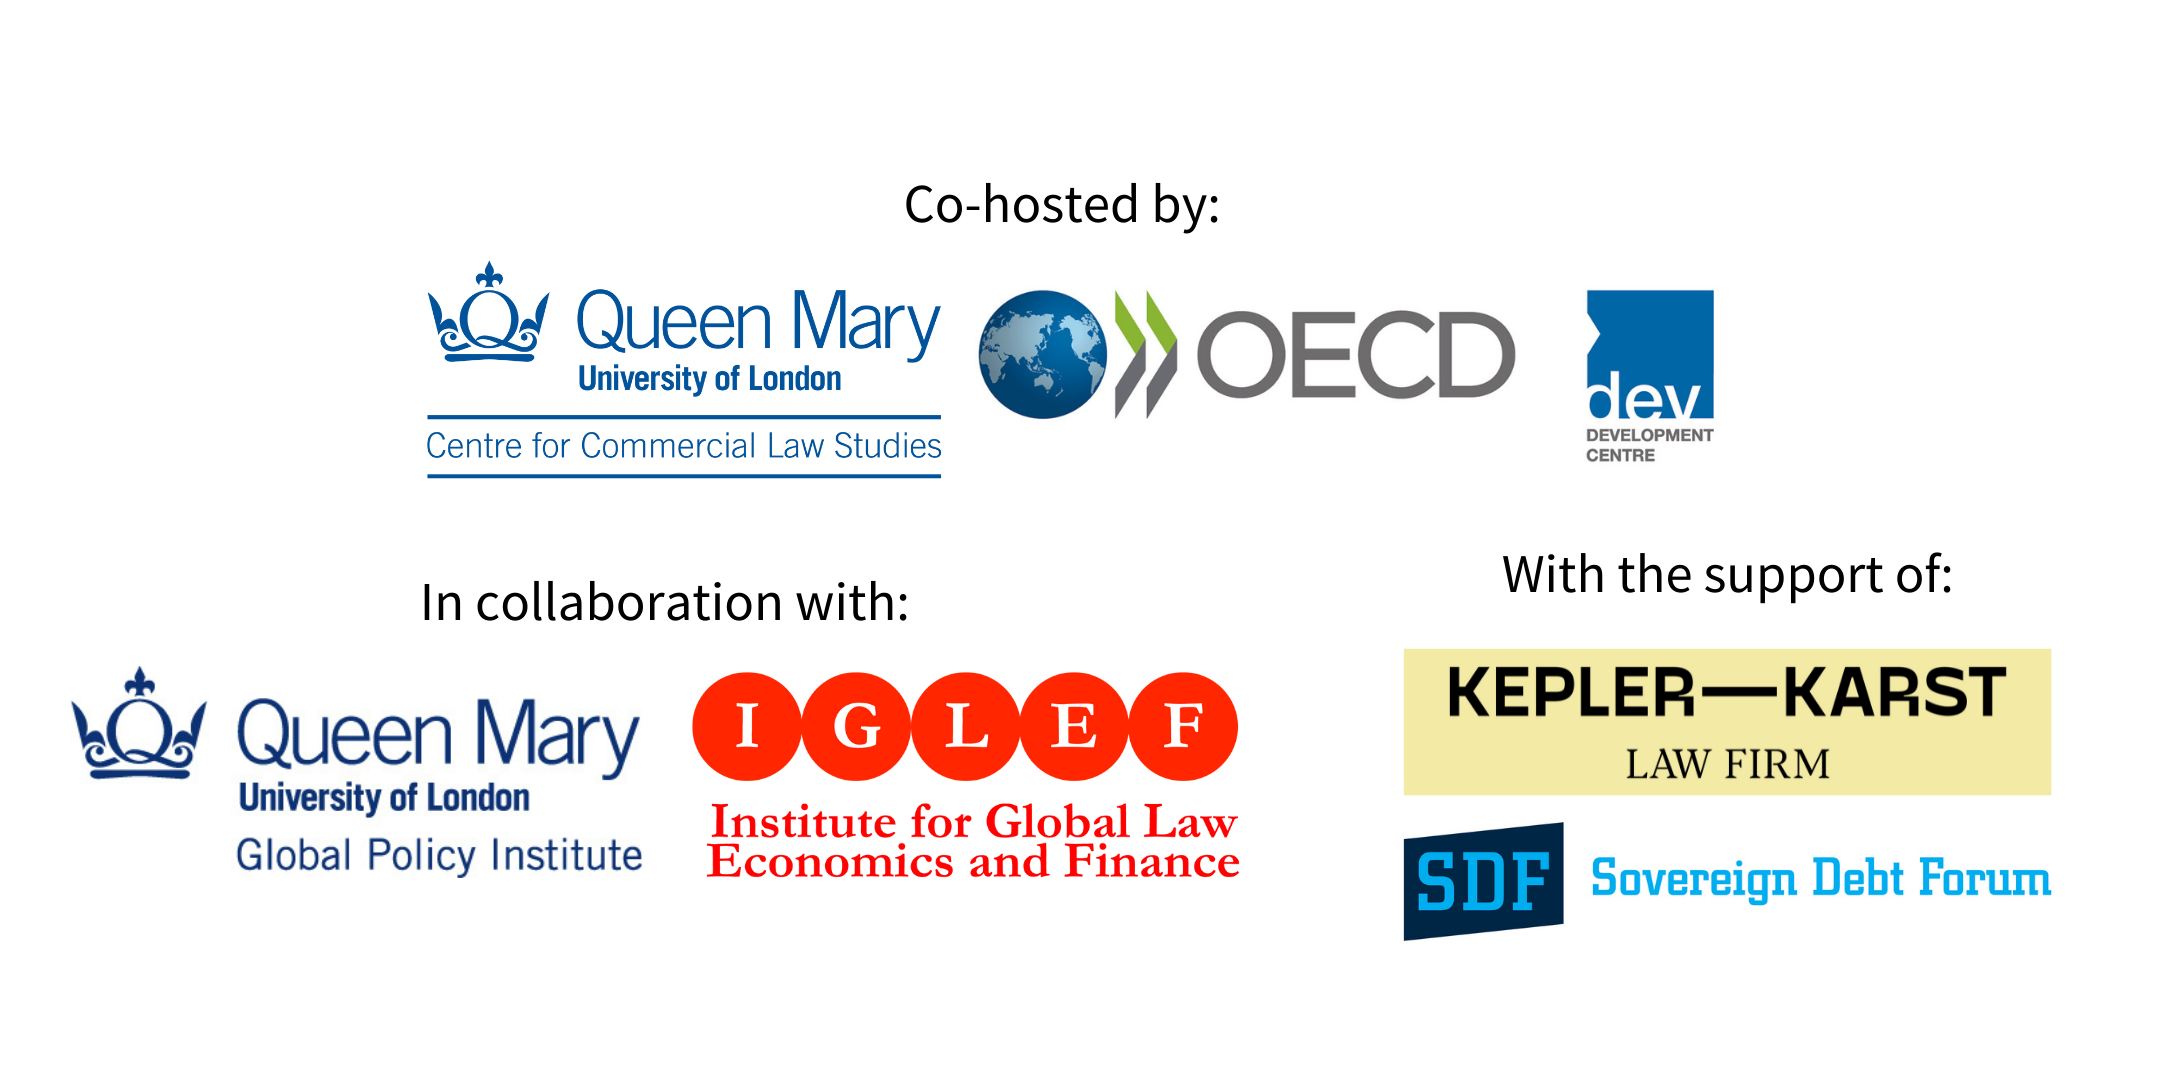 Co-hosted by: Centre for Commercial Law Studies, OECD, Development Centre. In collaboration with: Queen Mary Global Policy Institute, Institute for Global Law, Economics and Finance, Kepler Karst Law Firm, Sovereign Debt Forum